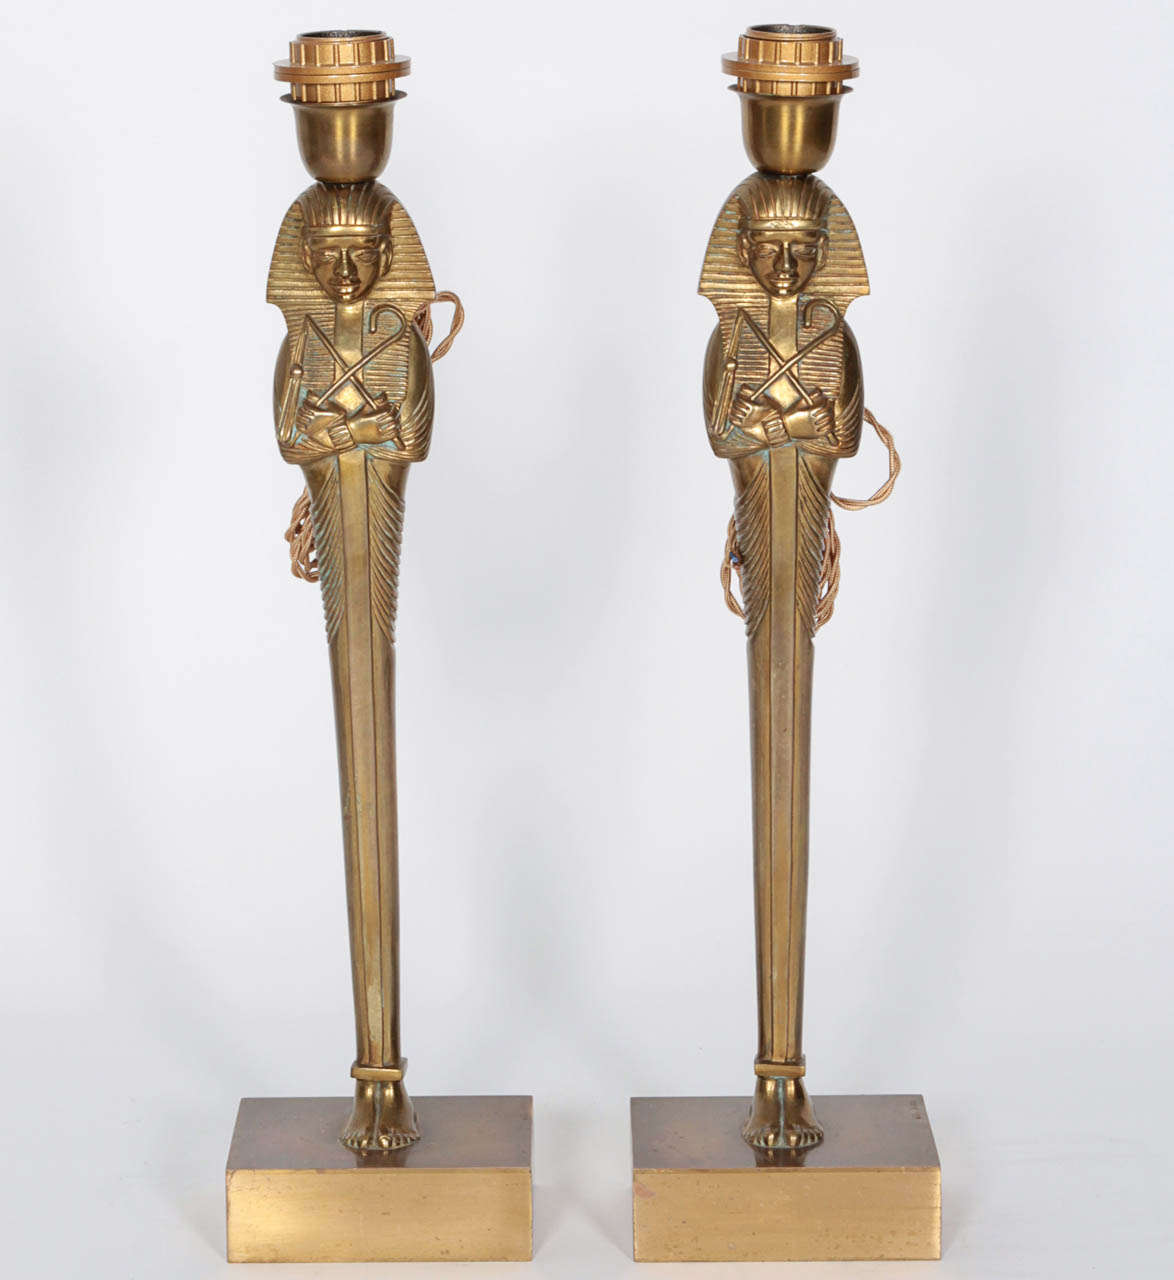 Rare pair of Egyptian solid bronze table lamps.